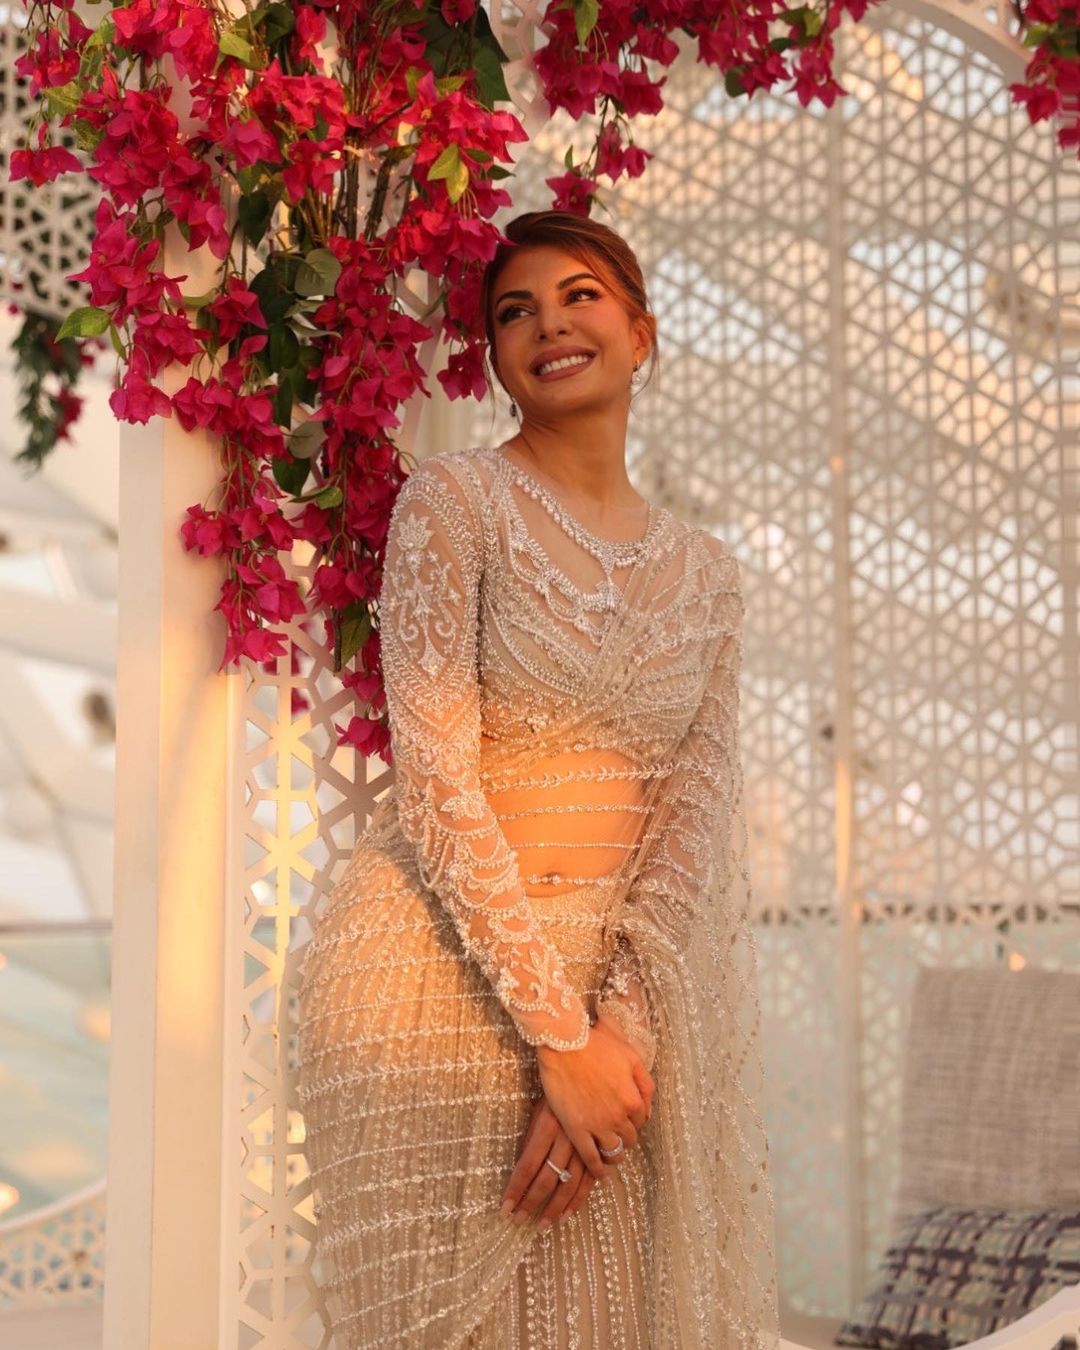 Jacqueline Fernandez looks chic in the embellished see-through saree